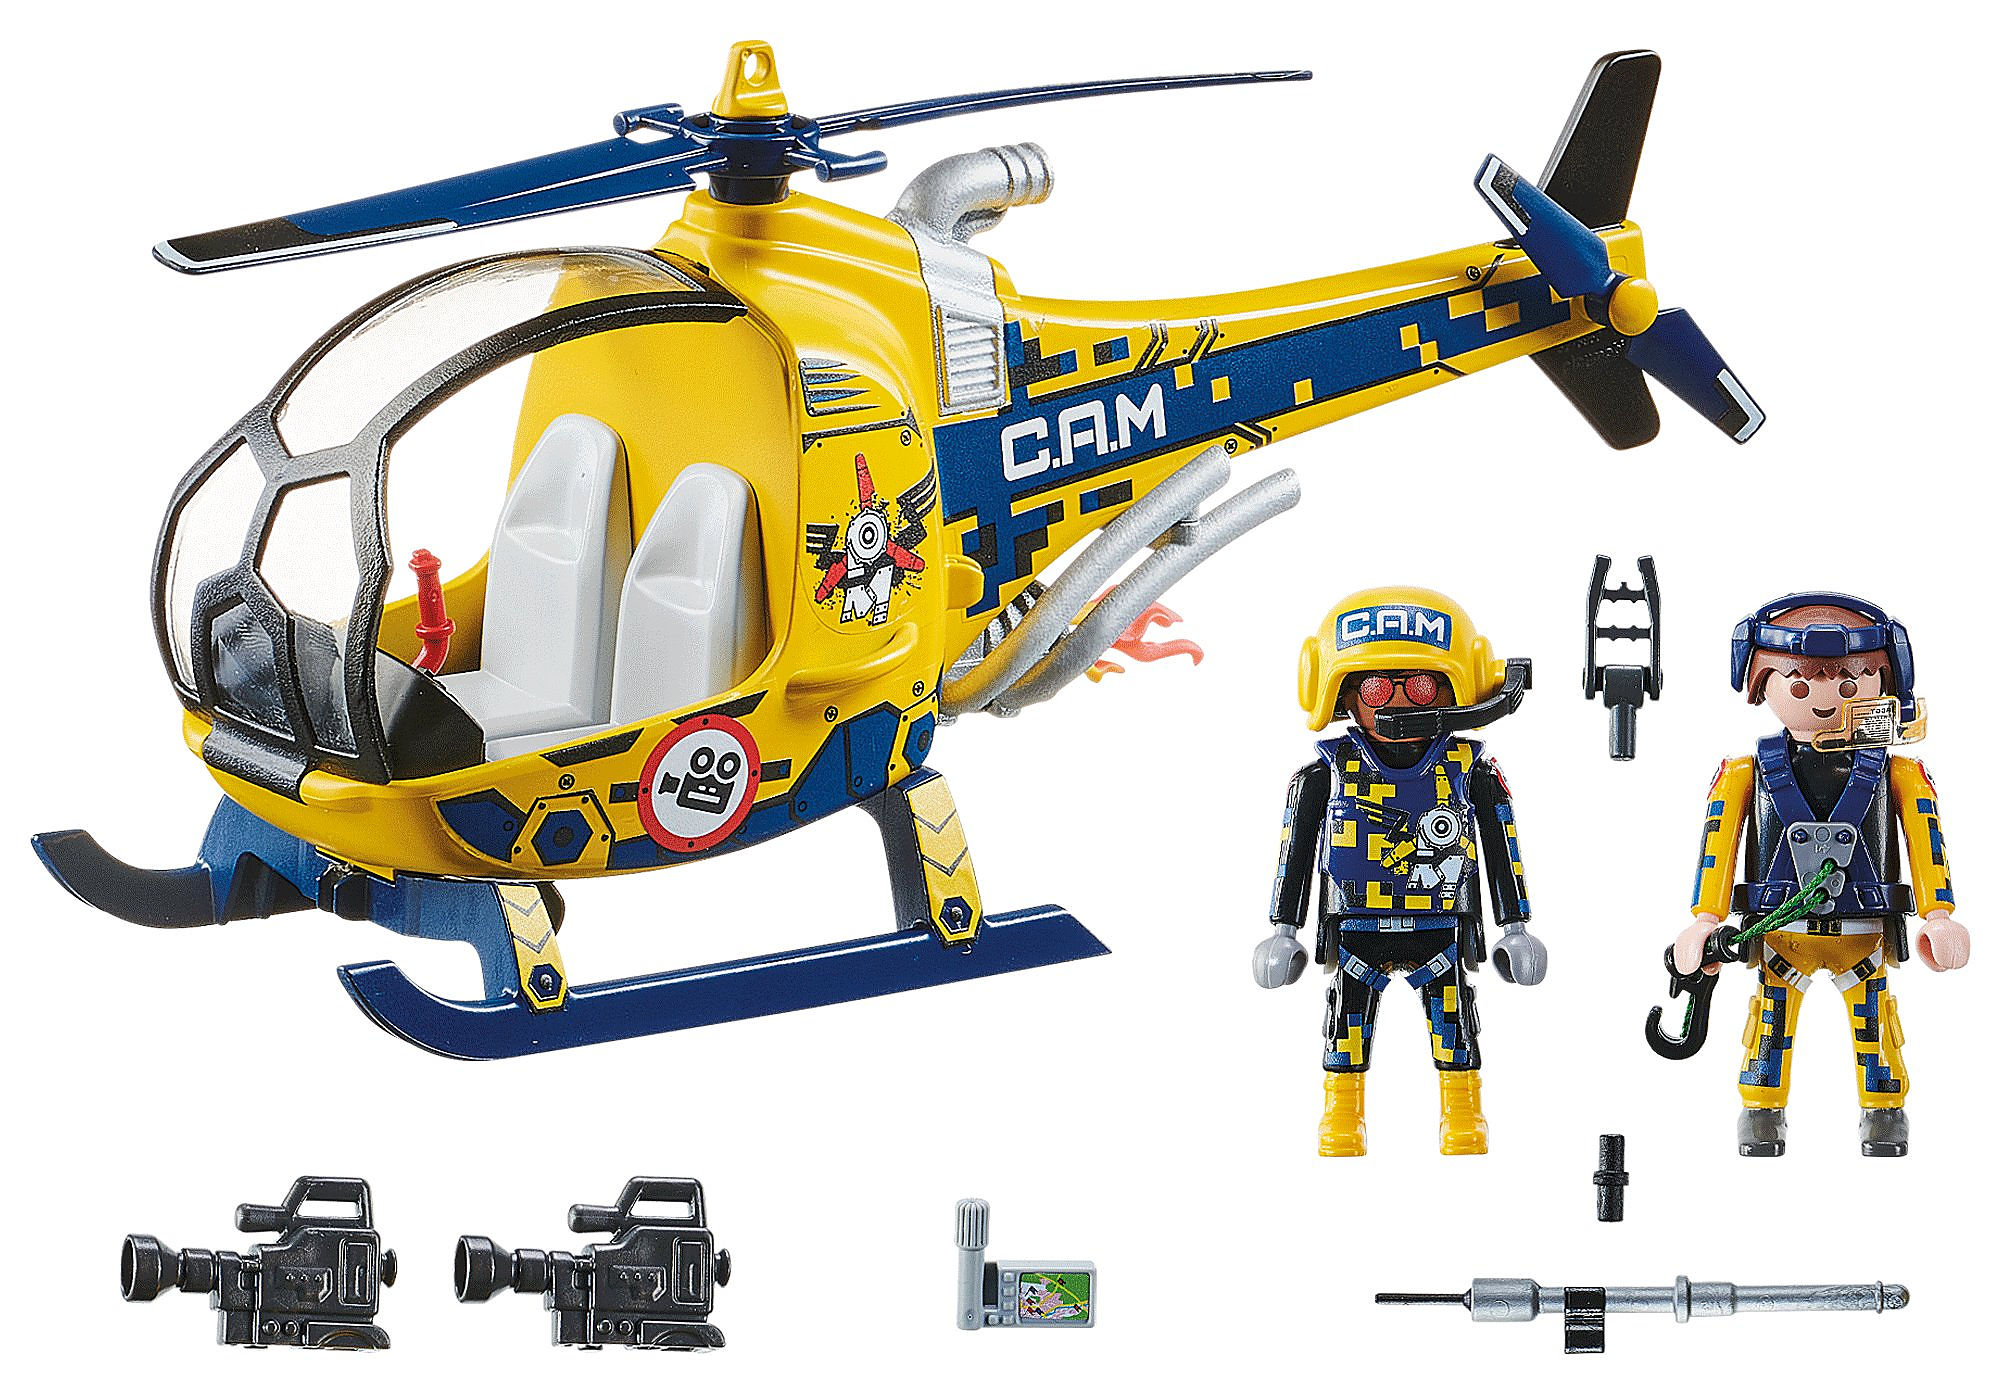 Speciaal Heiligdom Werkgever Air Stunt Show Helicopter with Film - 70833 | PLAYMOBIL®